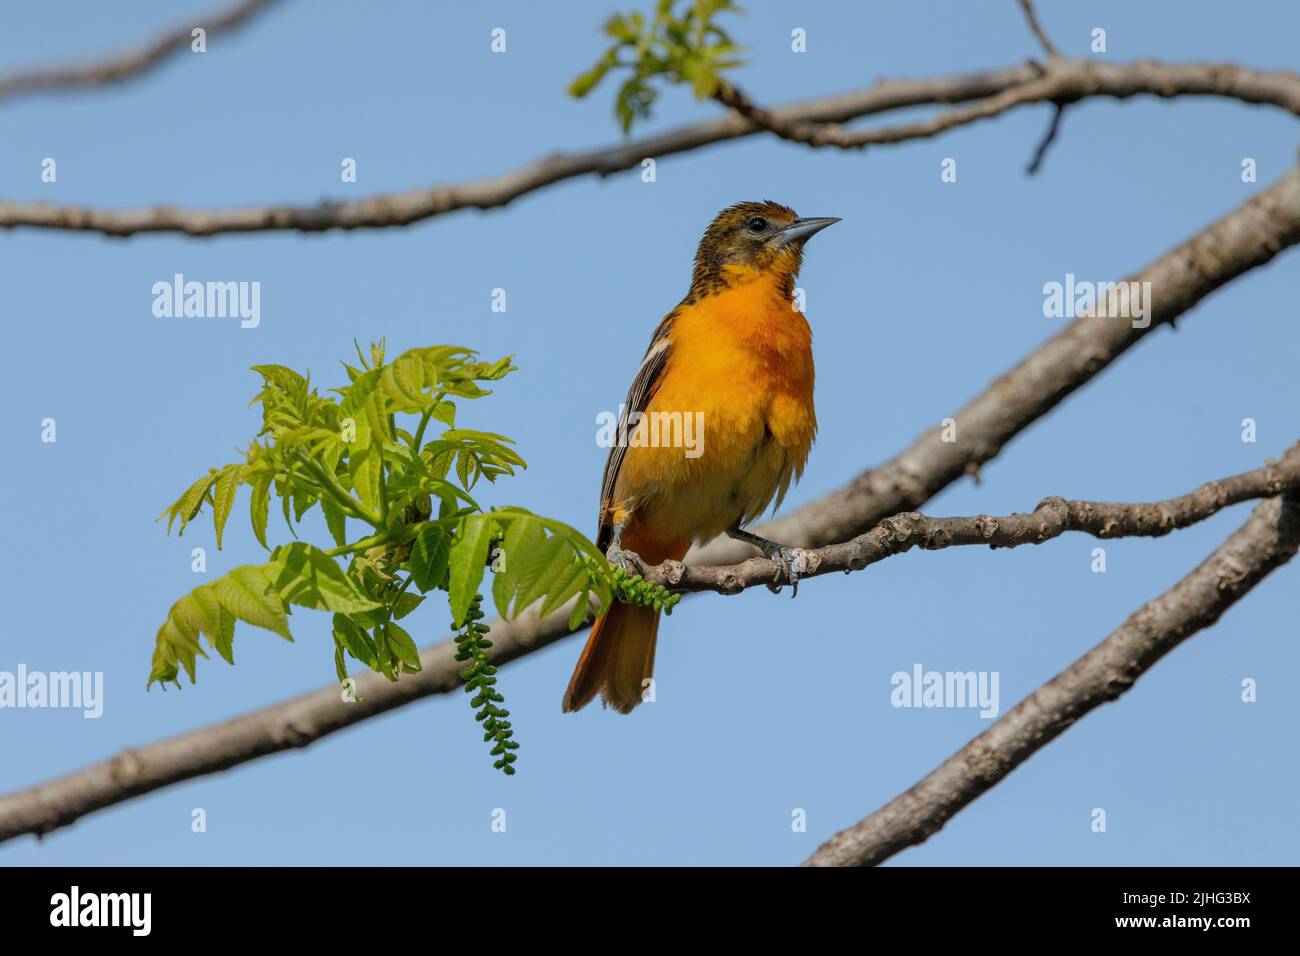 Baltimore oriole perched on branch Stock Photo